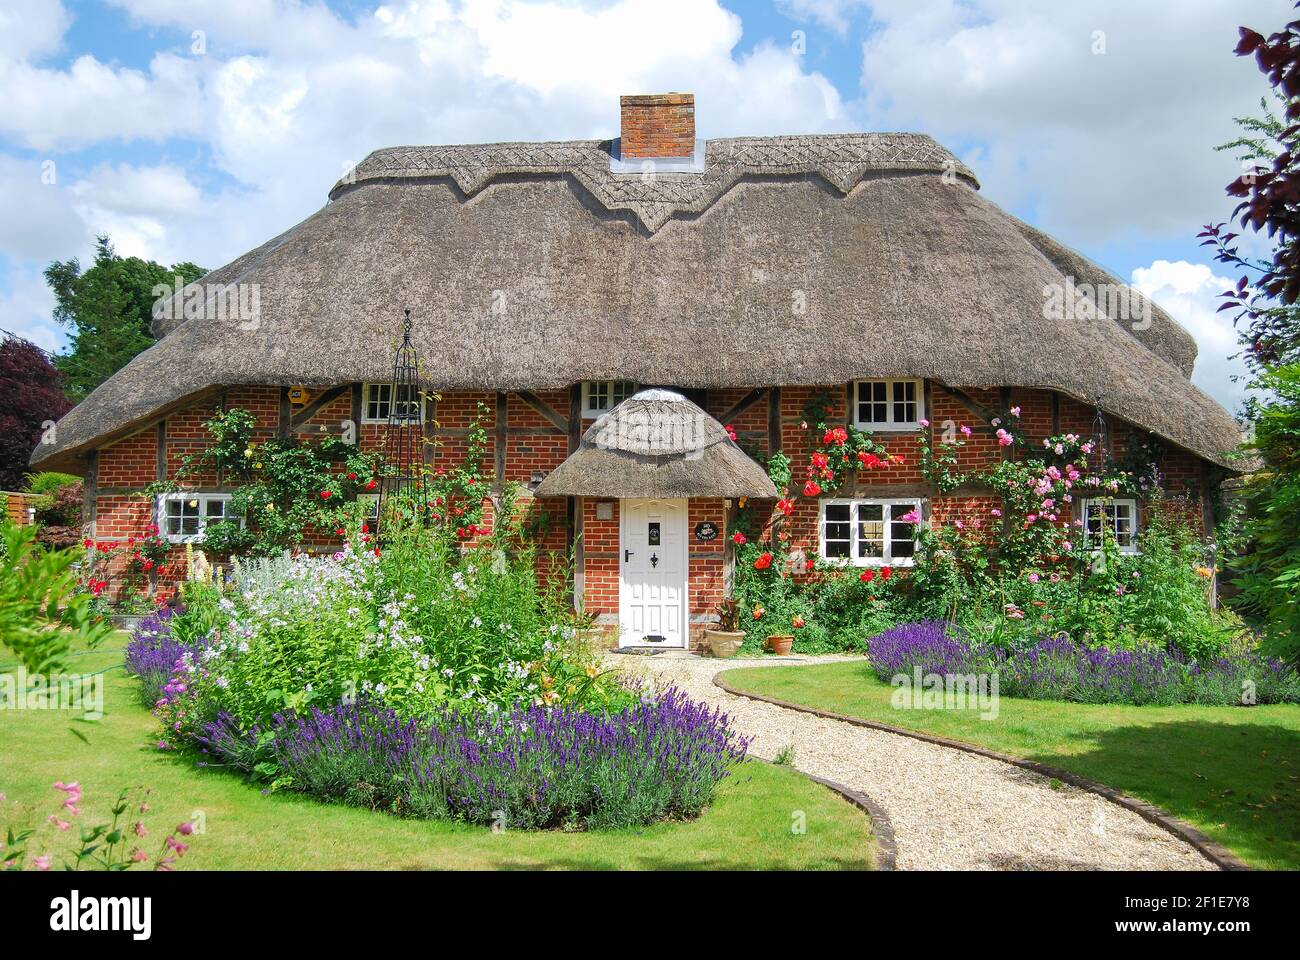 Thatched country cottage and garden, Itchen Stoke, Hampshire, England, United Kingdom Stock Photo